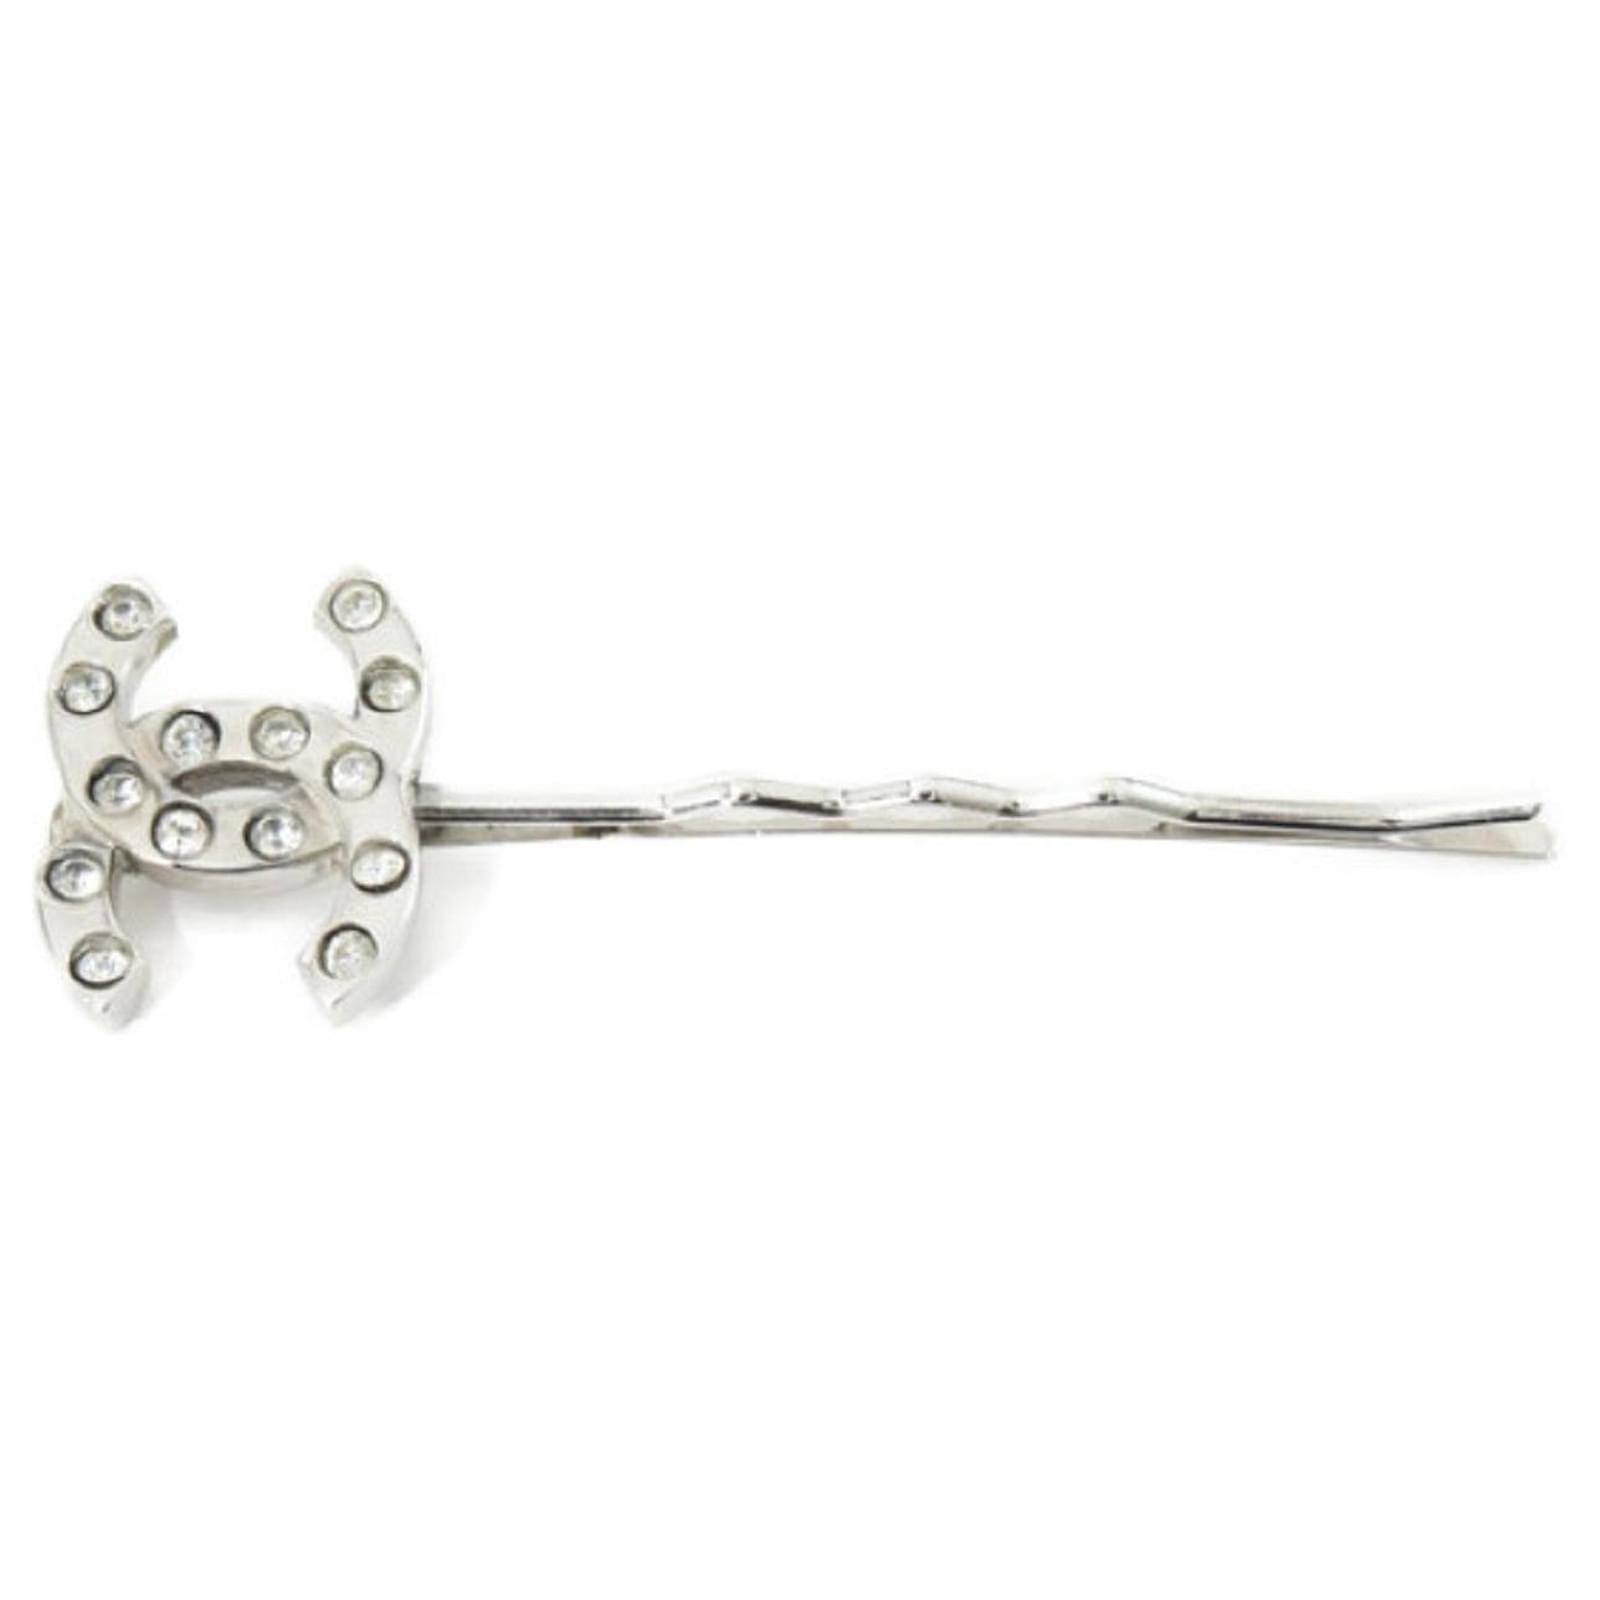 Used] Chanel Hairpins Coco Mark Rhinestone 00T Silver Silver Metal